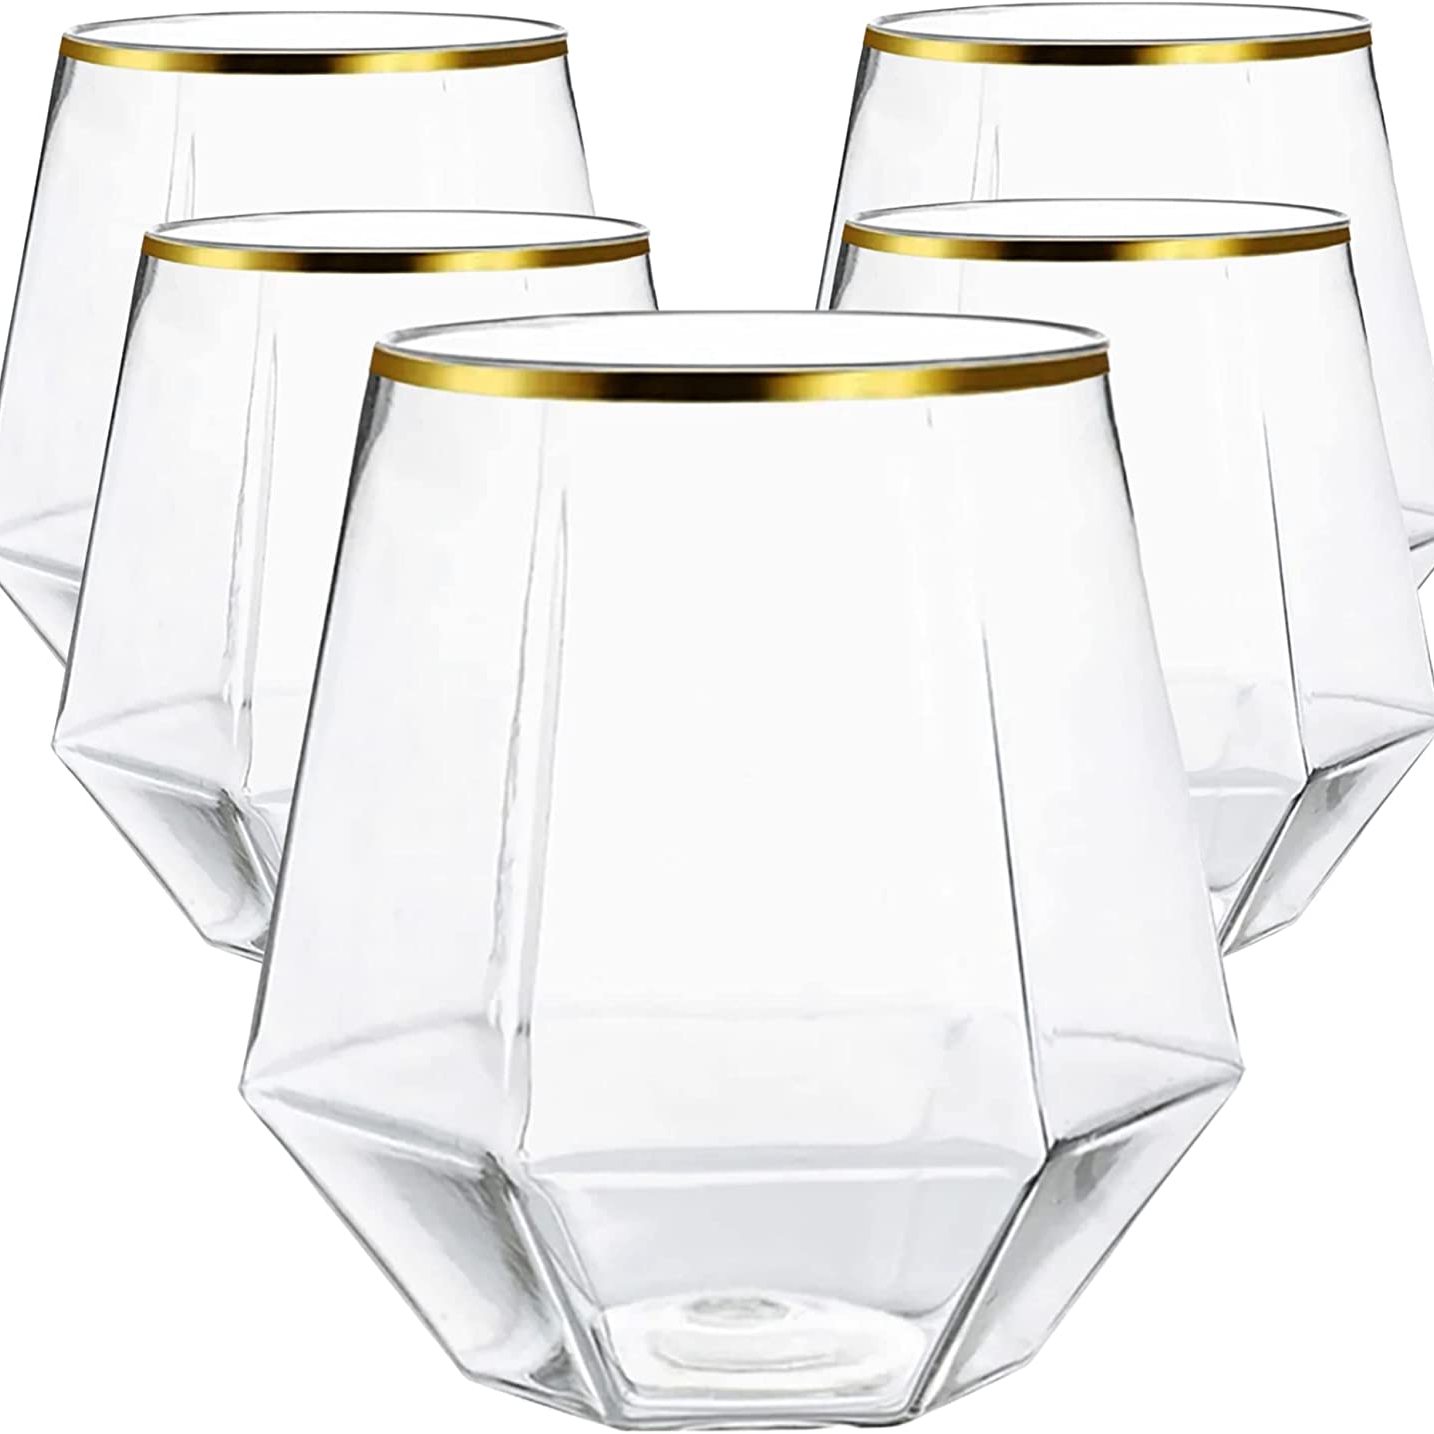 5pcs] 12oz Fancy Plastic White Wine Glasses Unbreakable for all Occasions